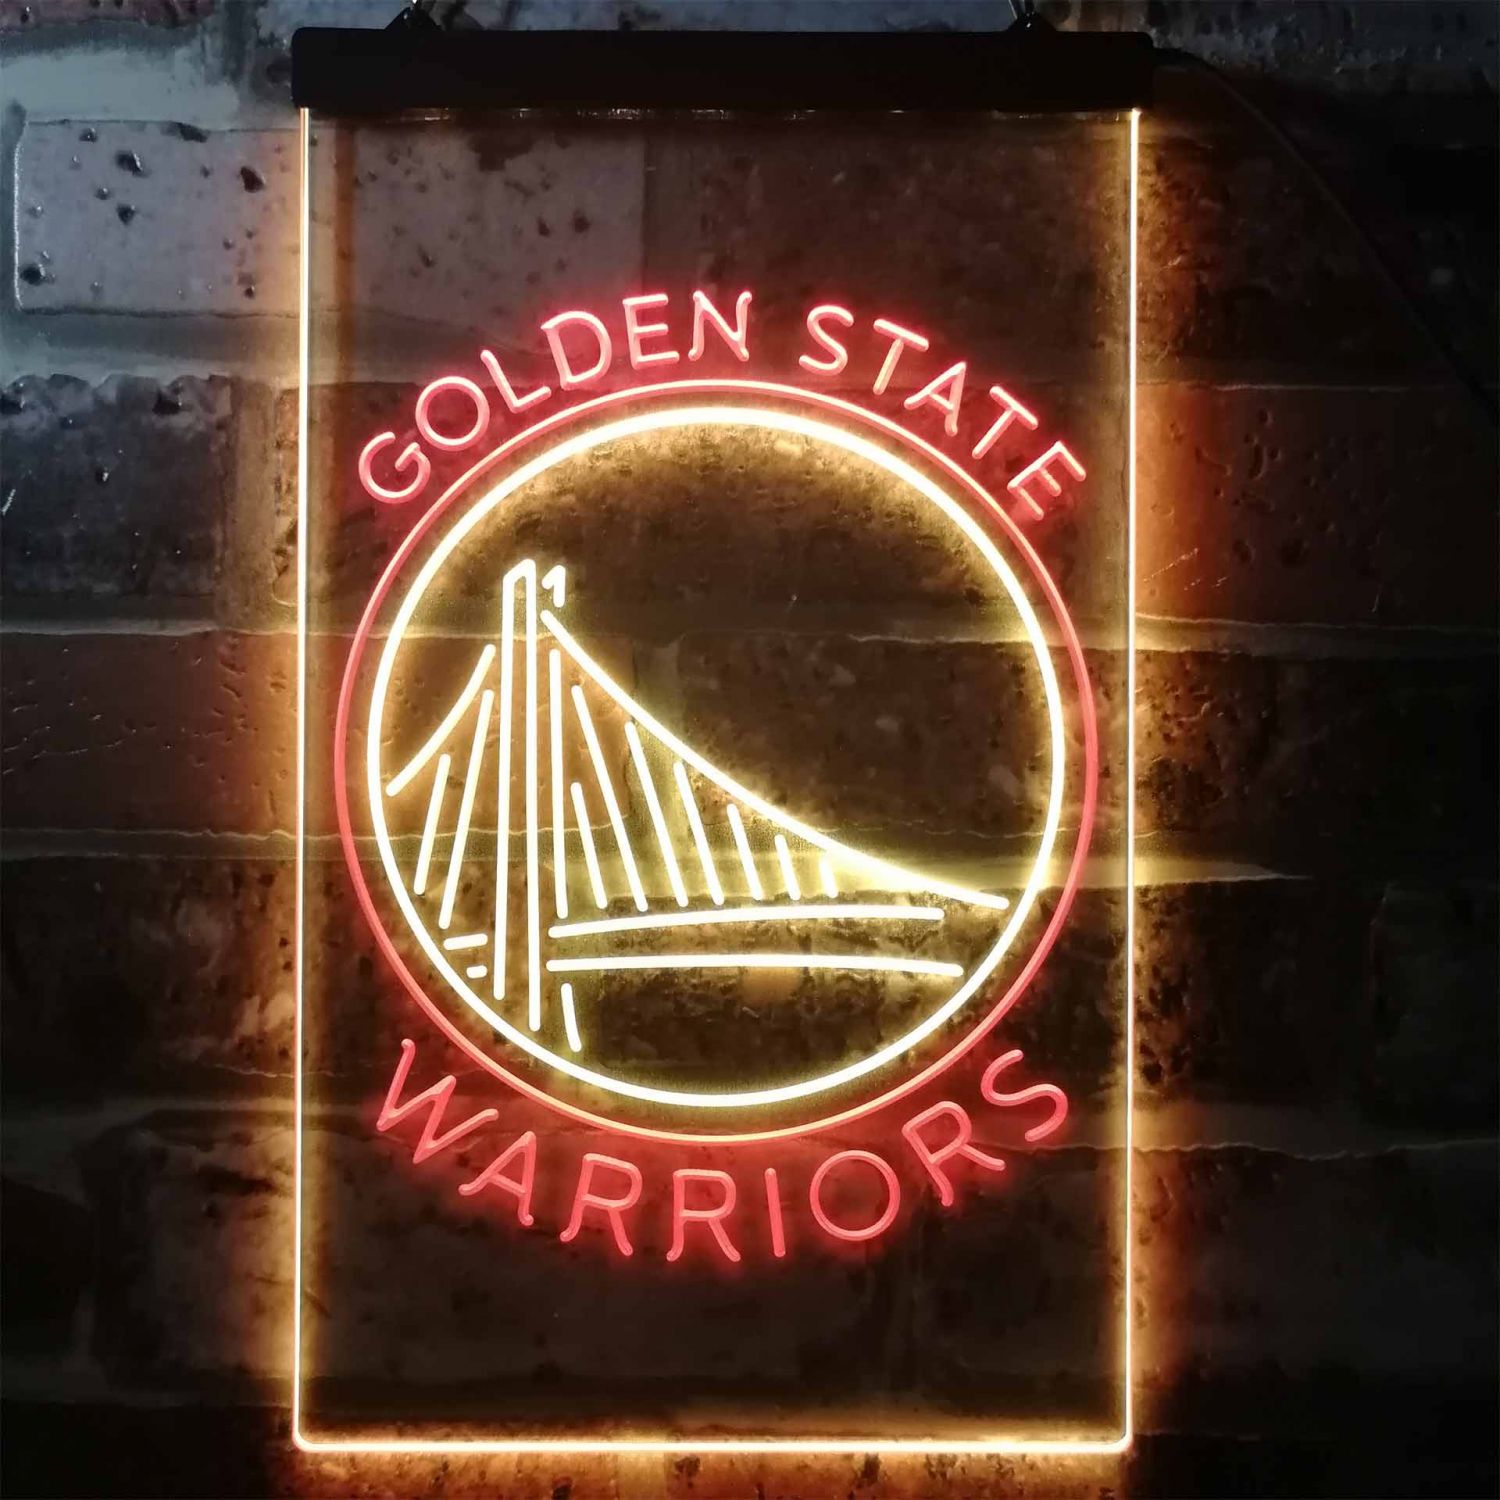 Golden State Warriors Logo LED Neon Sign - neon sign - LED sign - shop -  What's your sign?